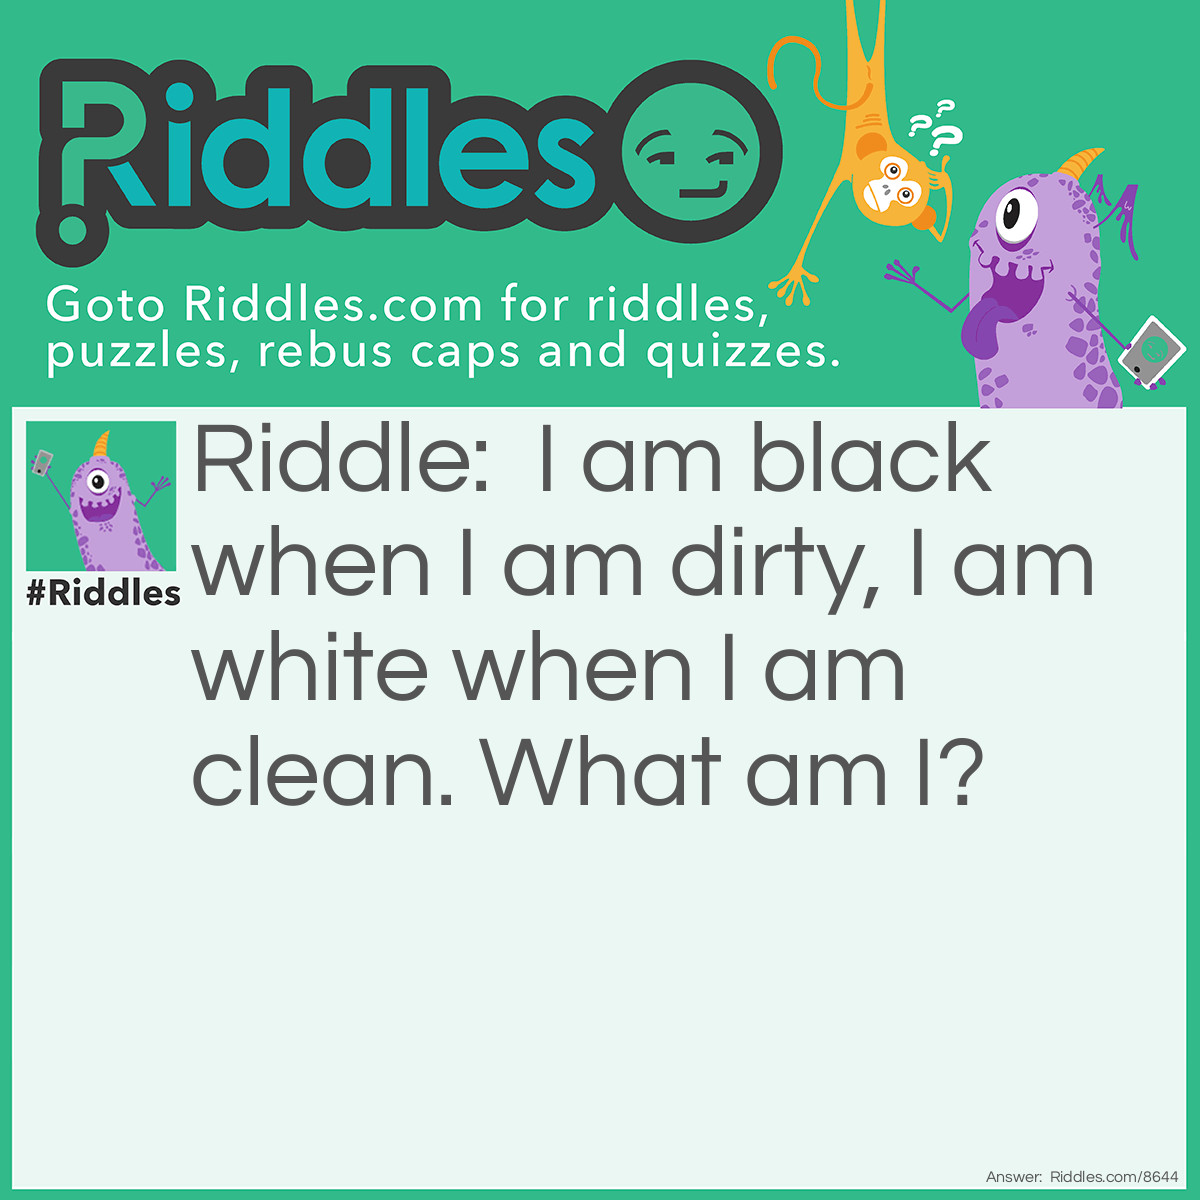 Riddle: I am black when I am dirty, I am white when I am clean. What am I? Answer: A whiteboard.